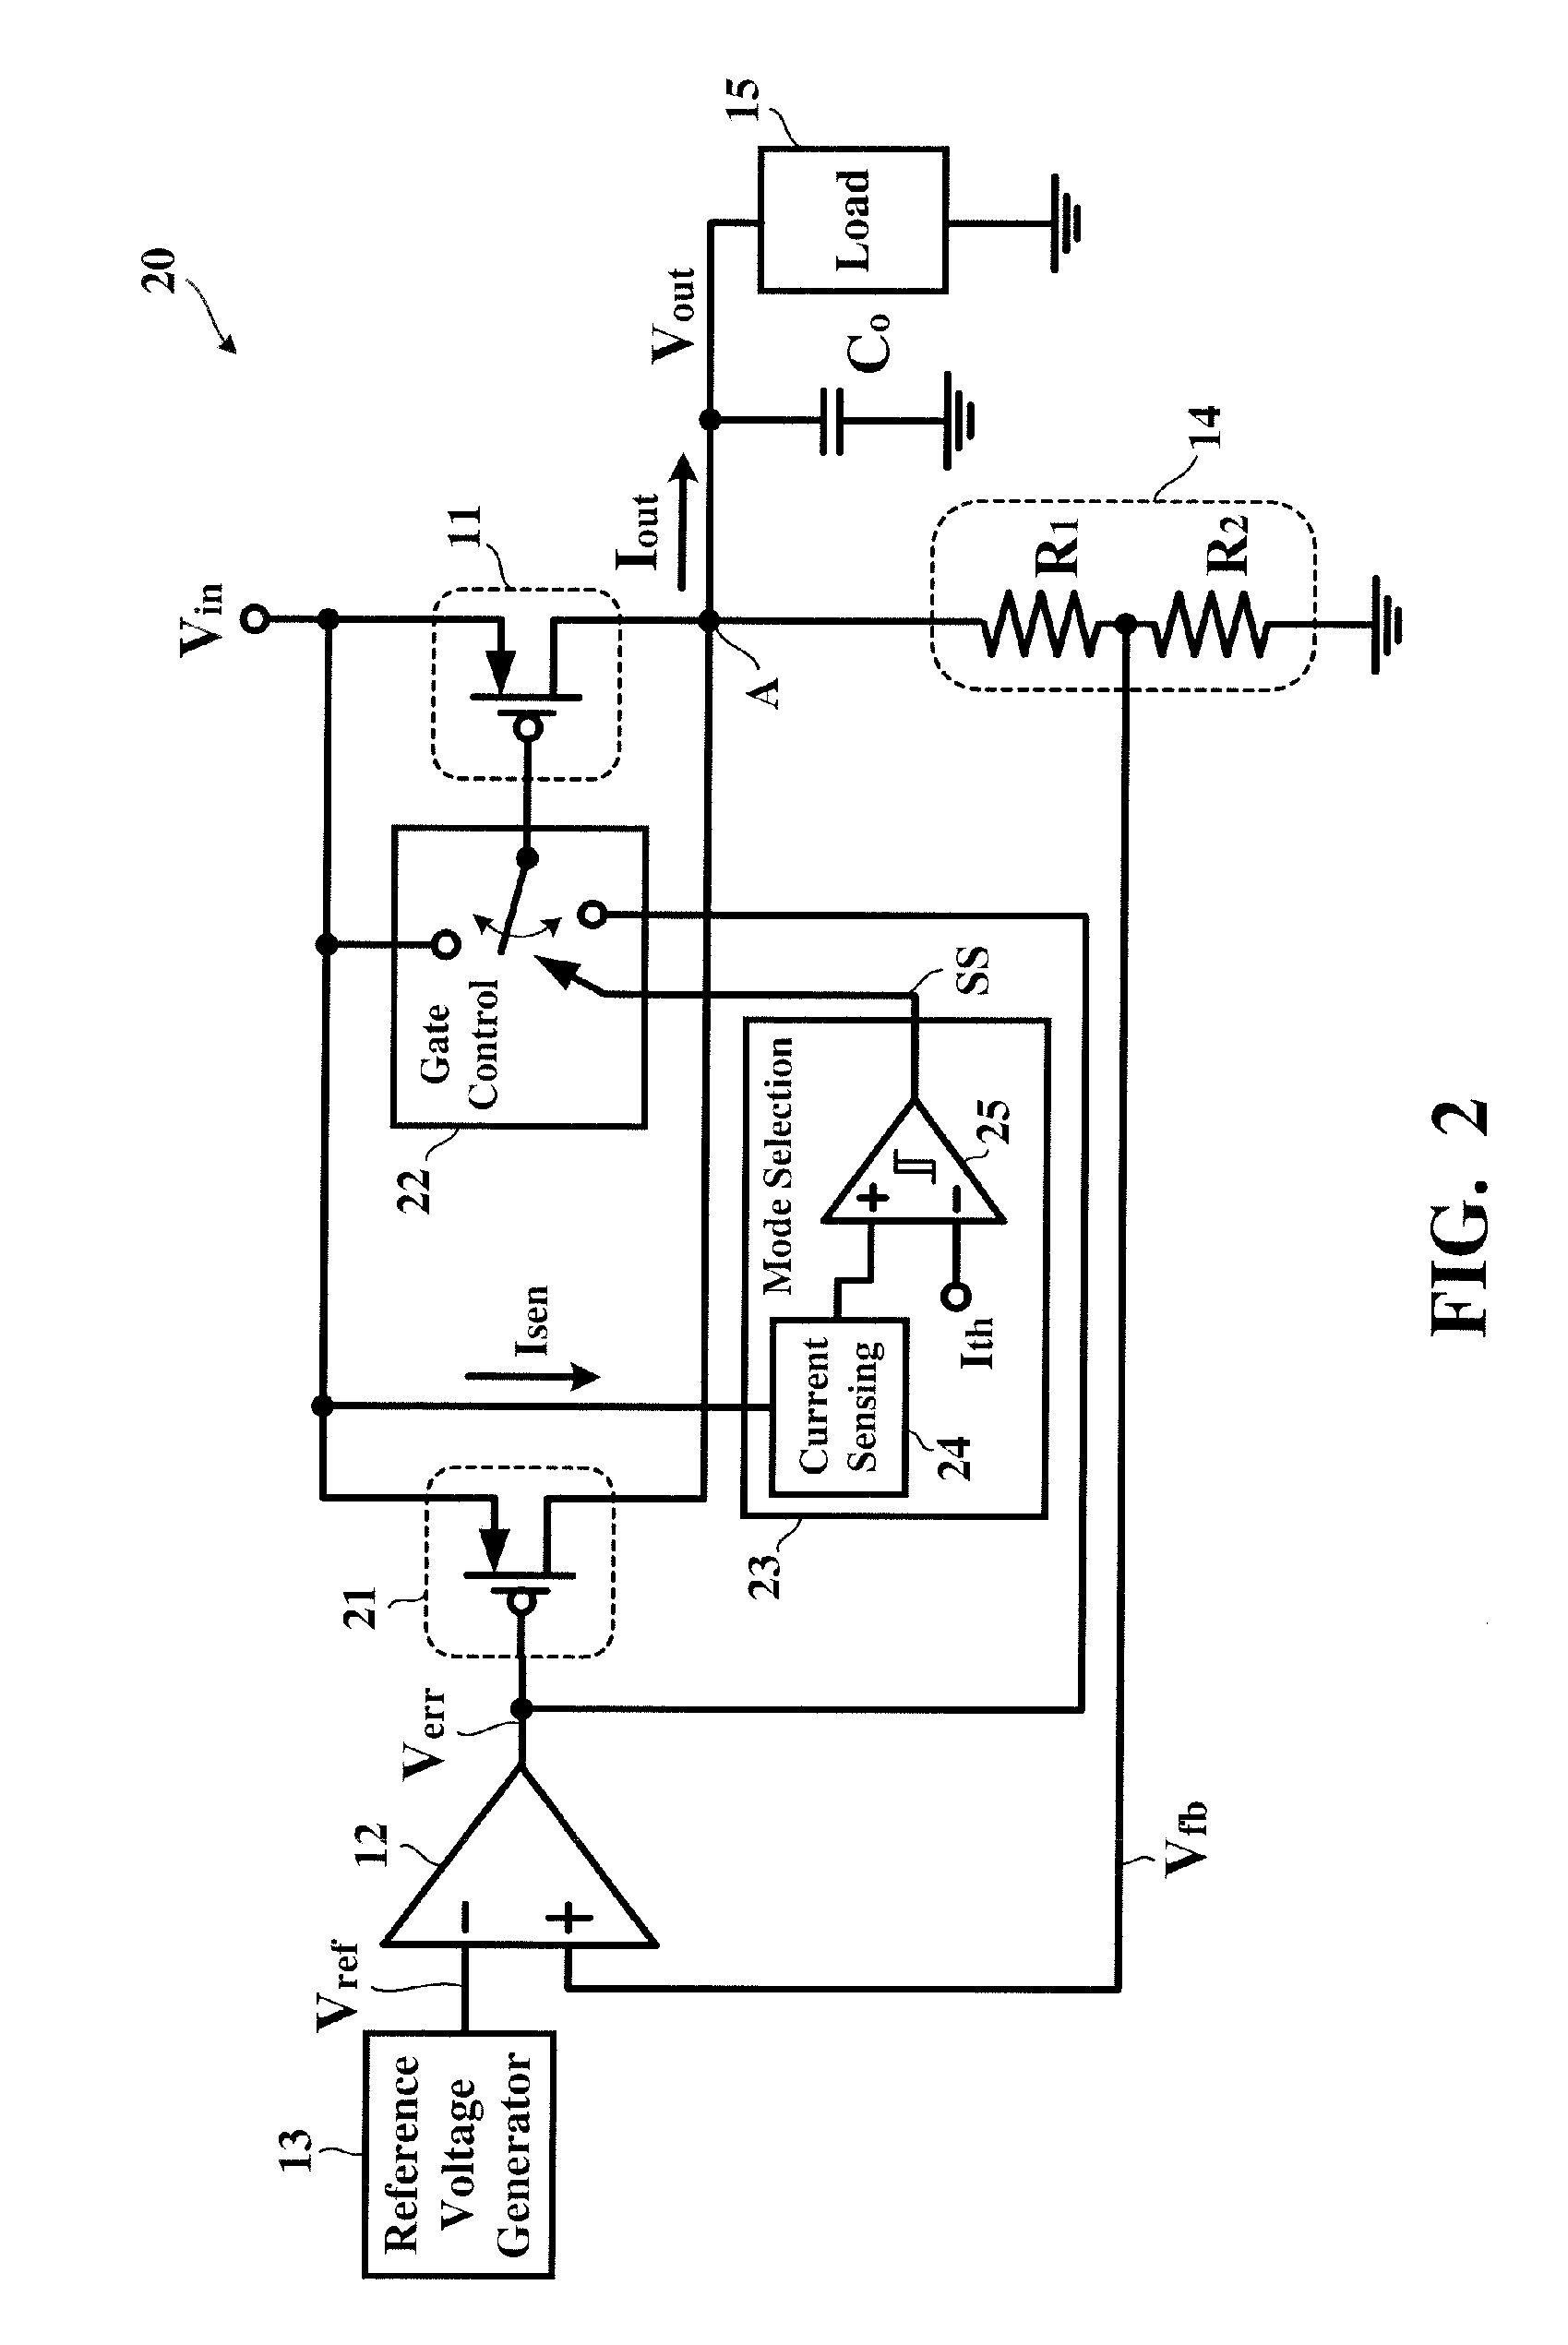 Linear voltage regulator with selectable light and heavy load paths